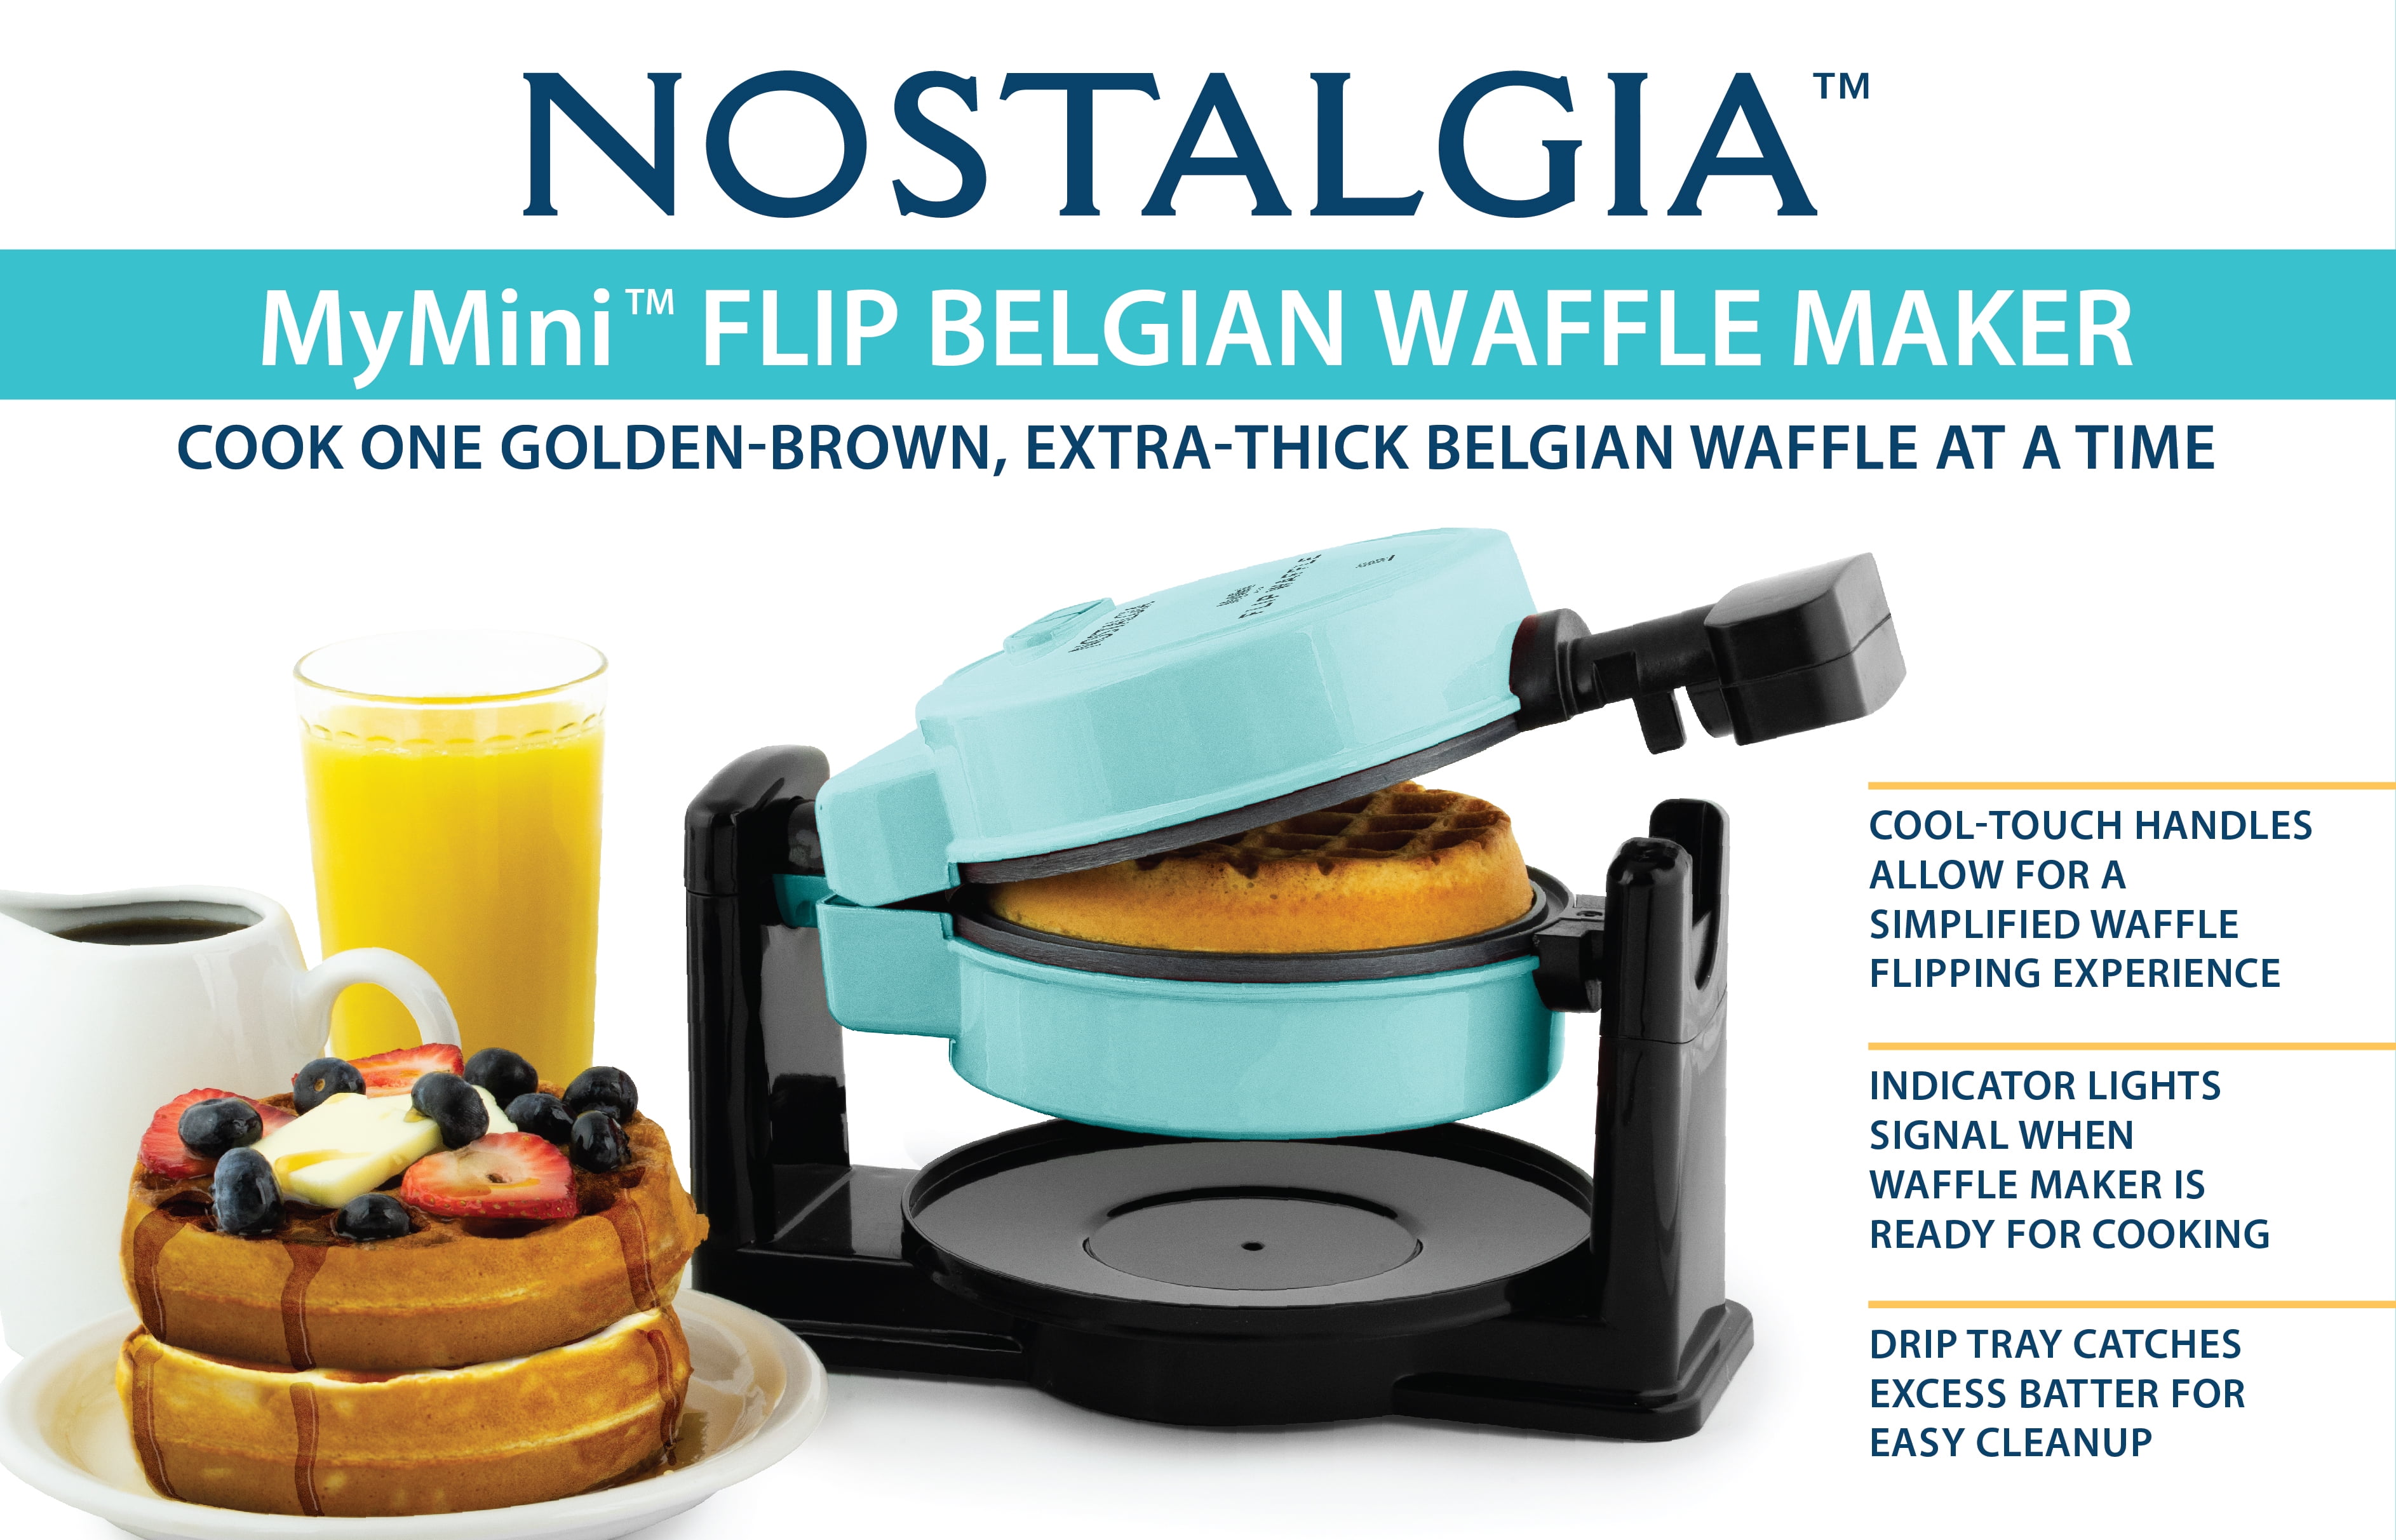 mywaffle Classic Waffle Maker - Armadale Brands